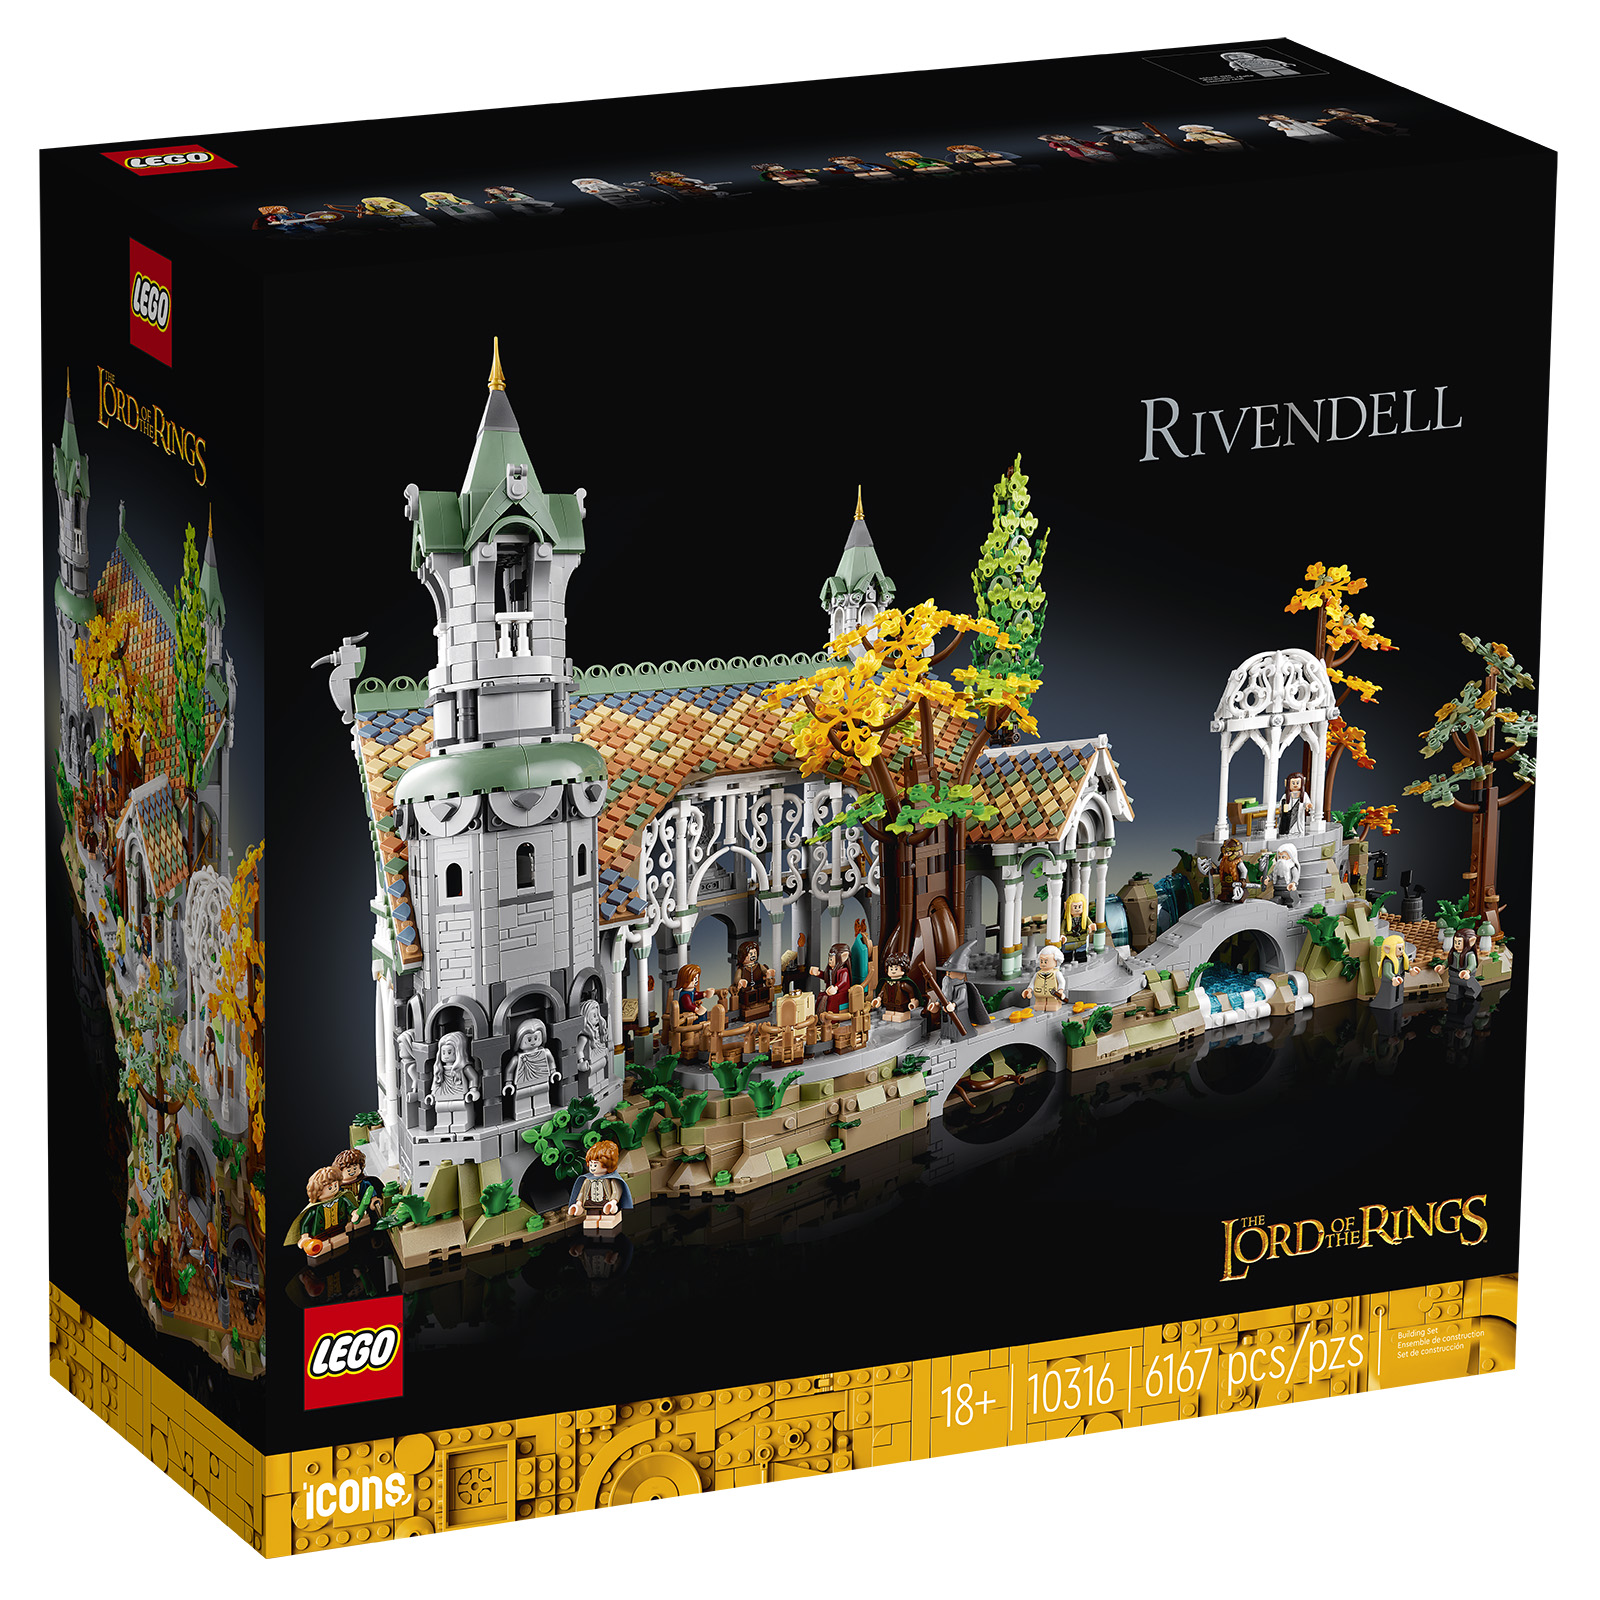 LEGO Lord of the Rings 79006 pas cher 